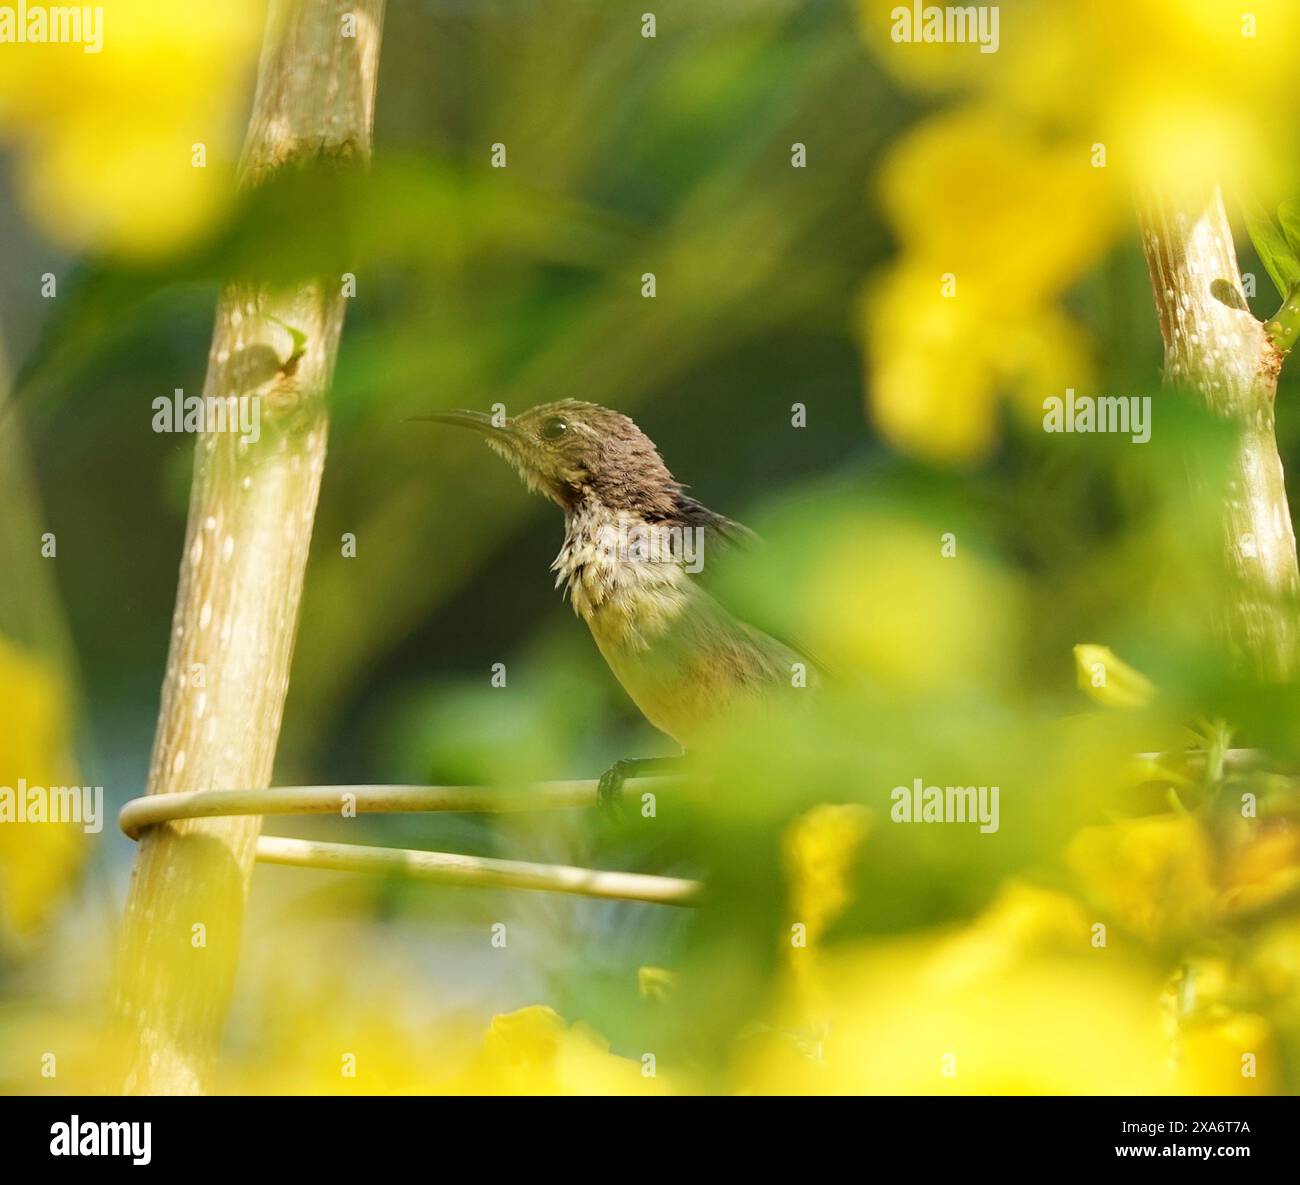 A tiny bird perched on a tree branch with yellow flowers Stock Photo